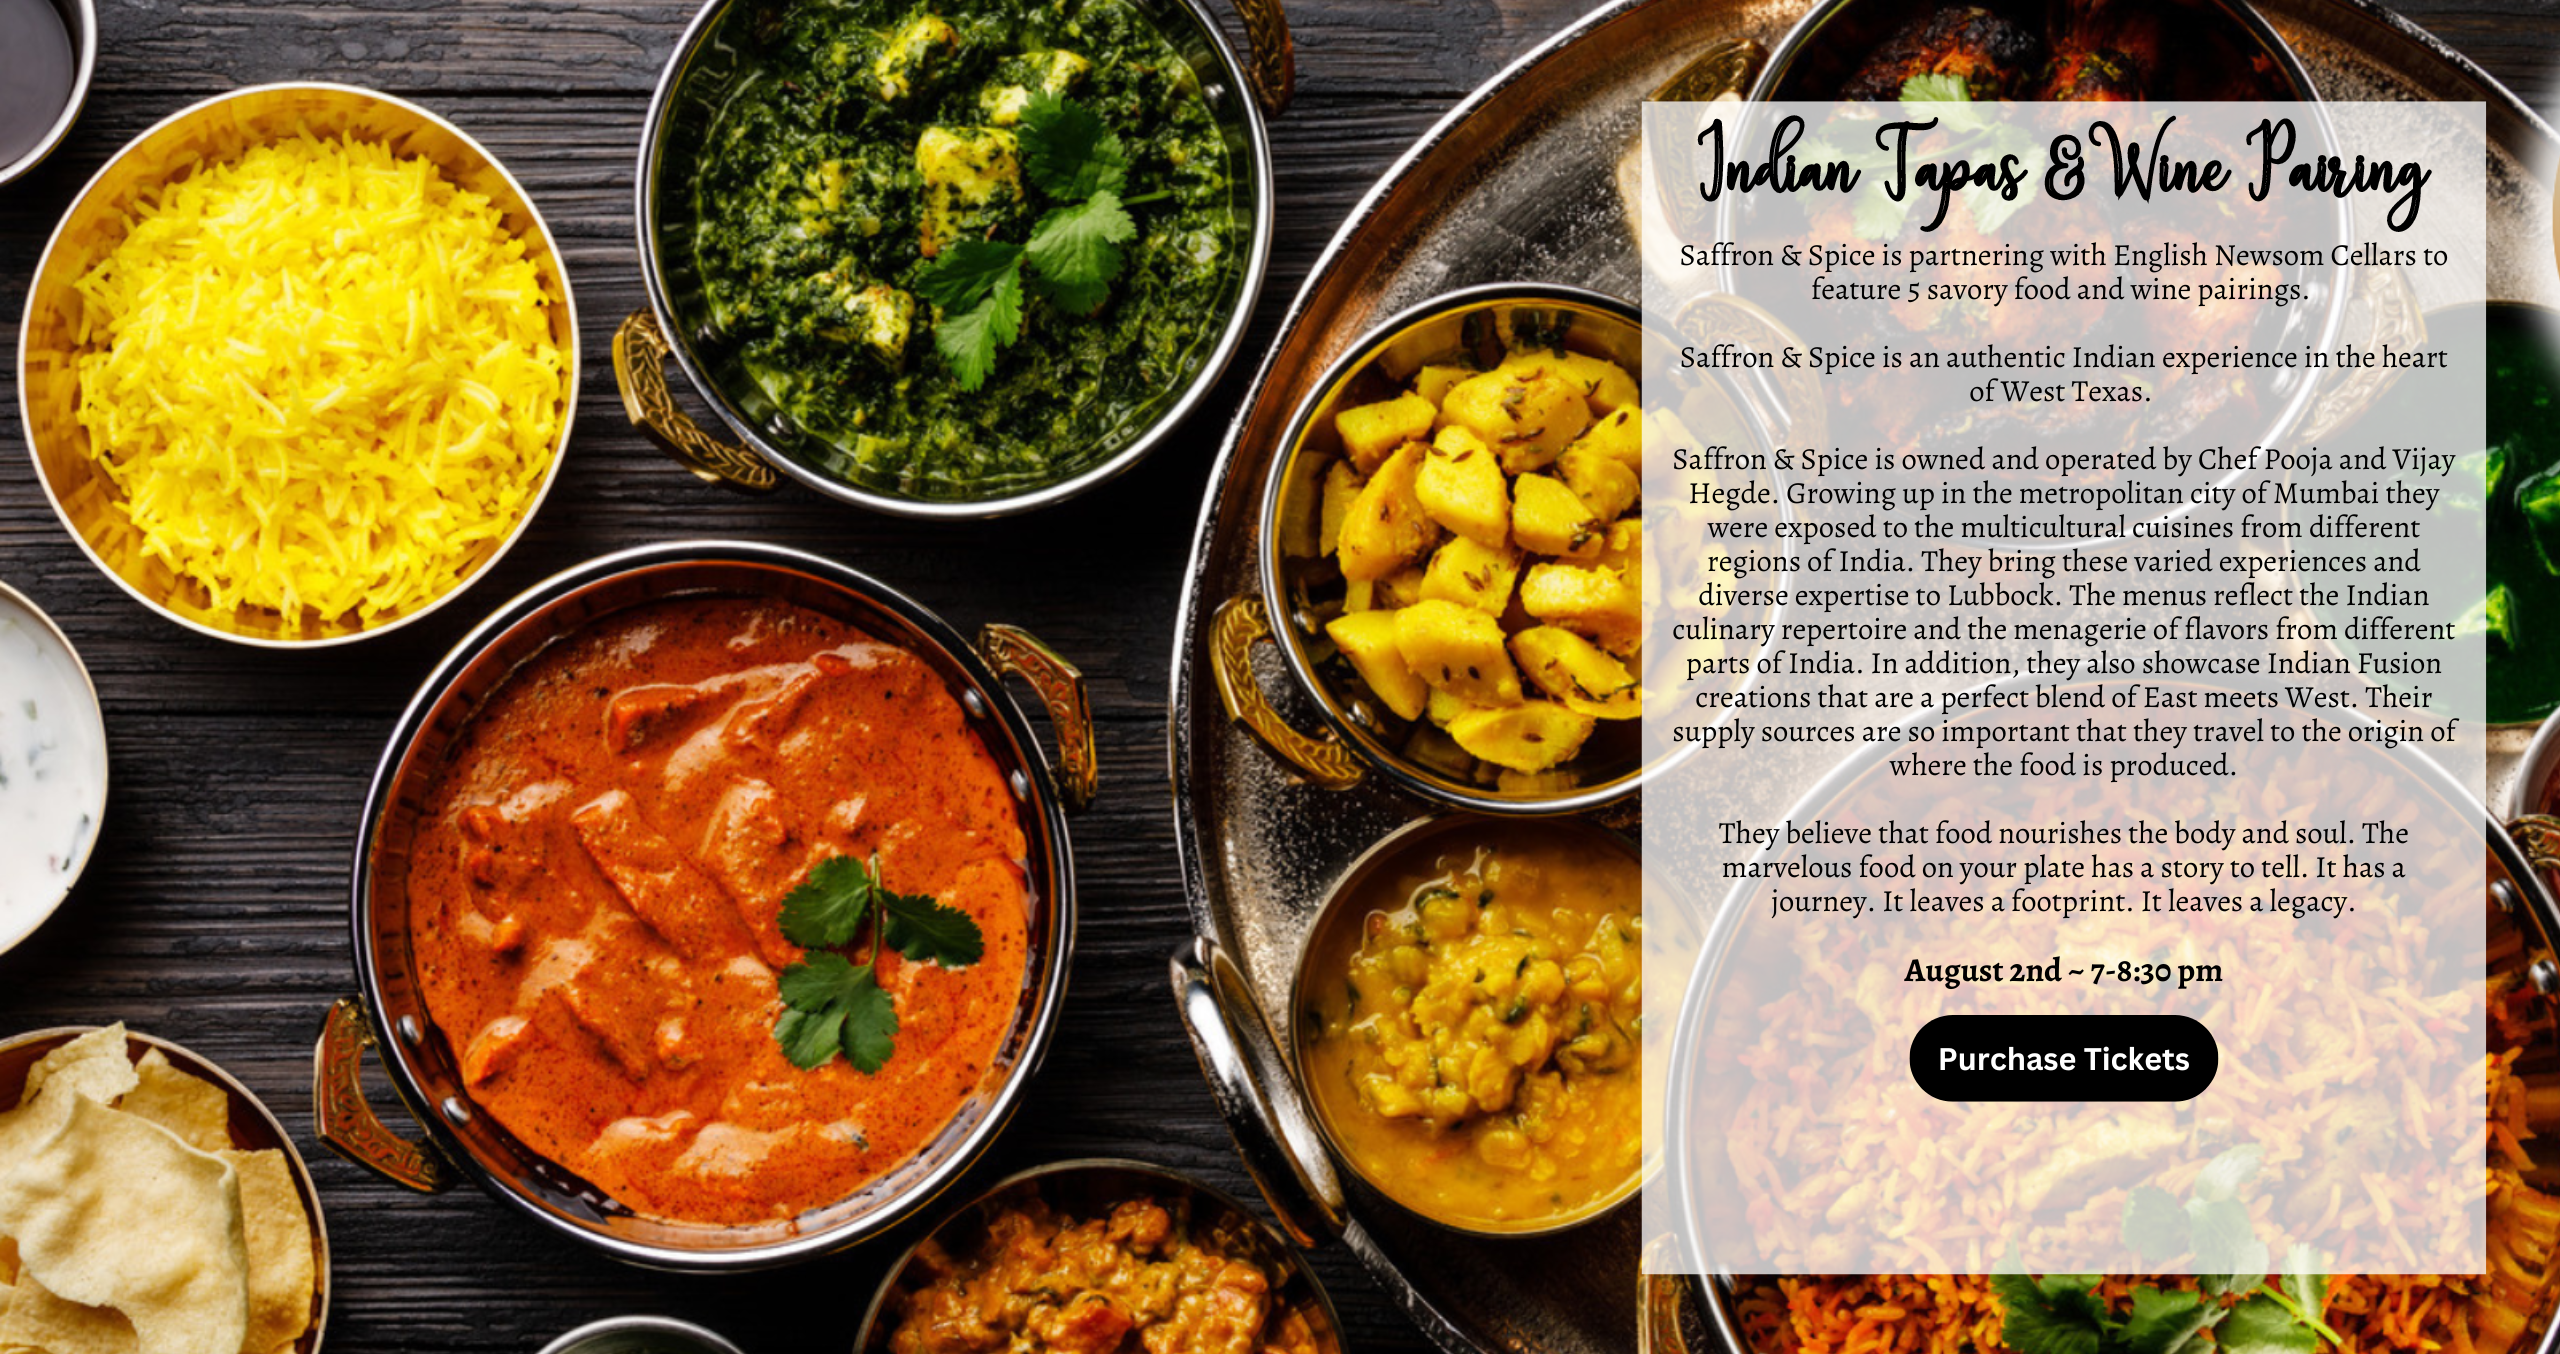 Indian Tapas & Food Pairing event information